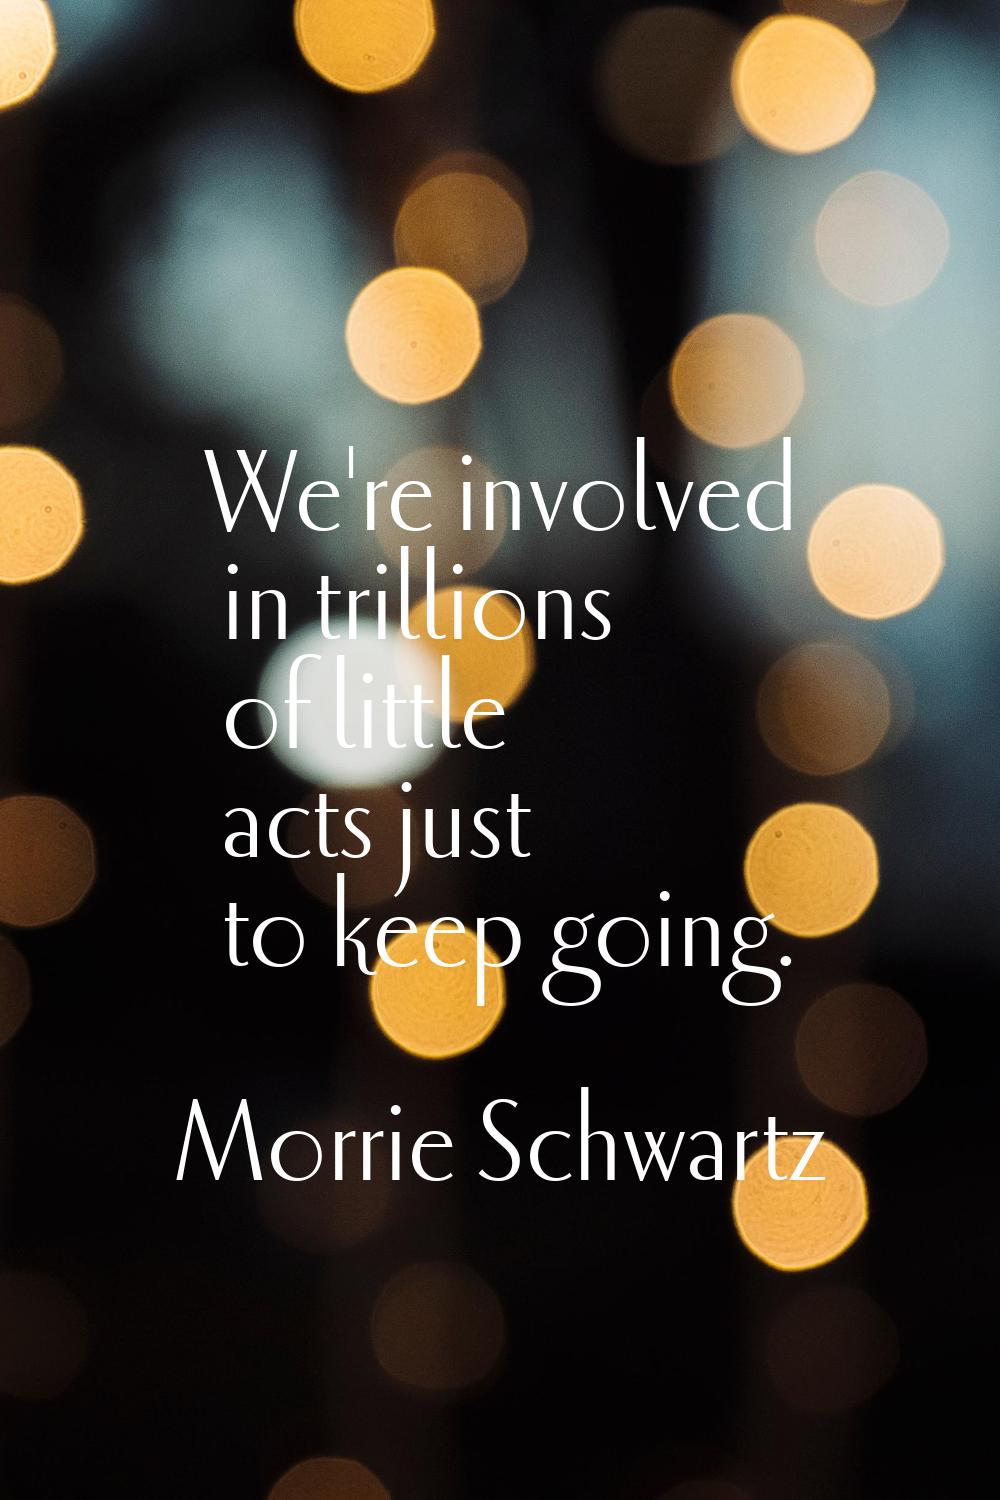 We're involved in trillions of little acts just to keep going.